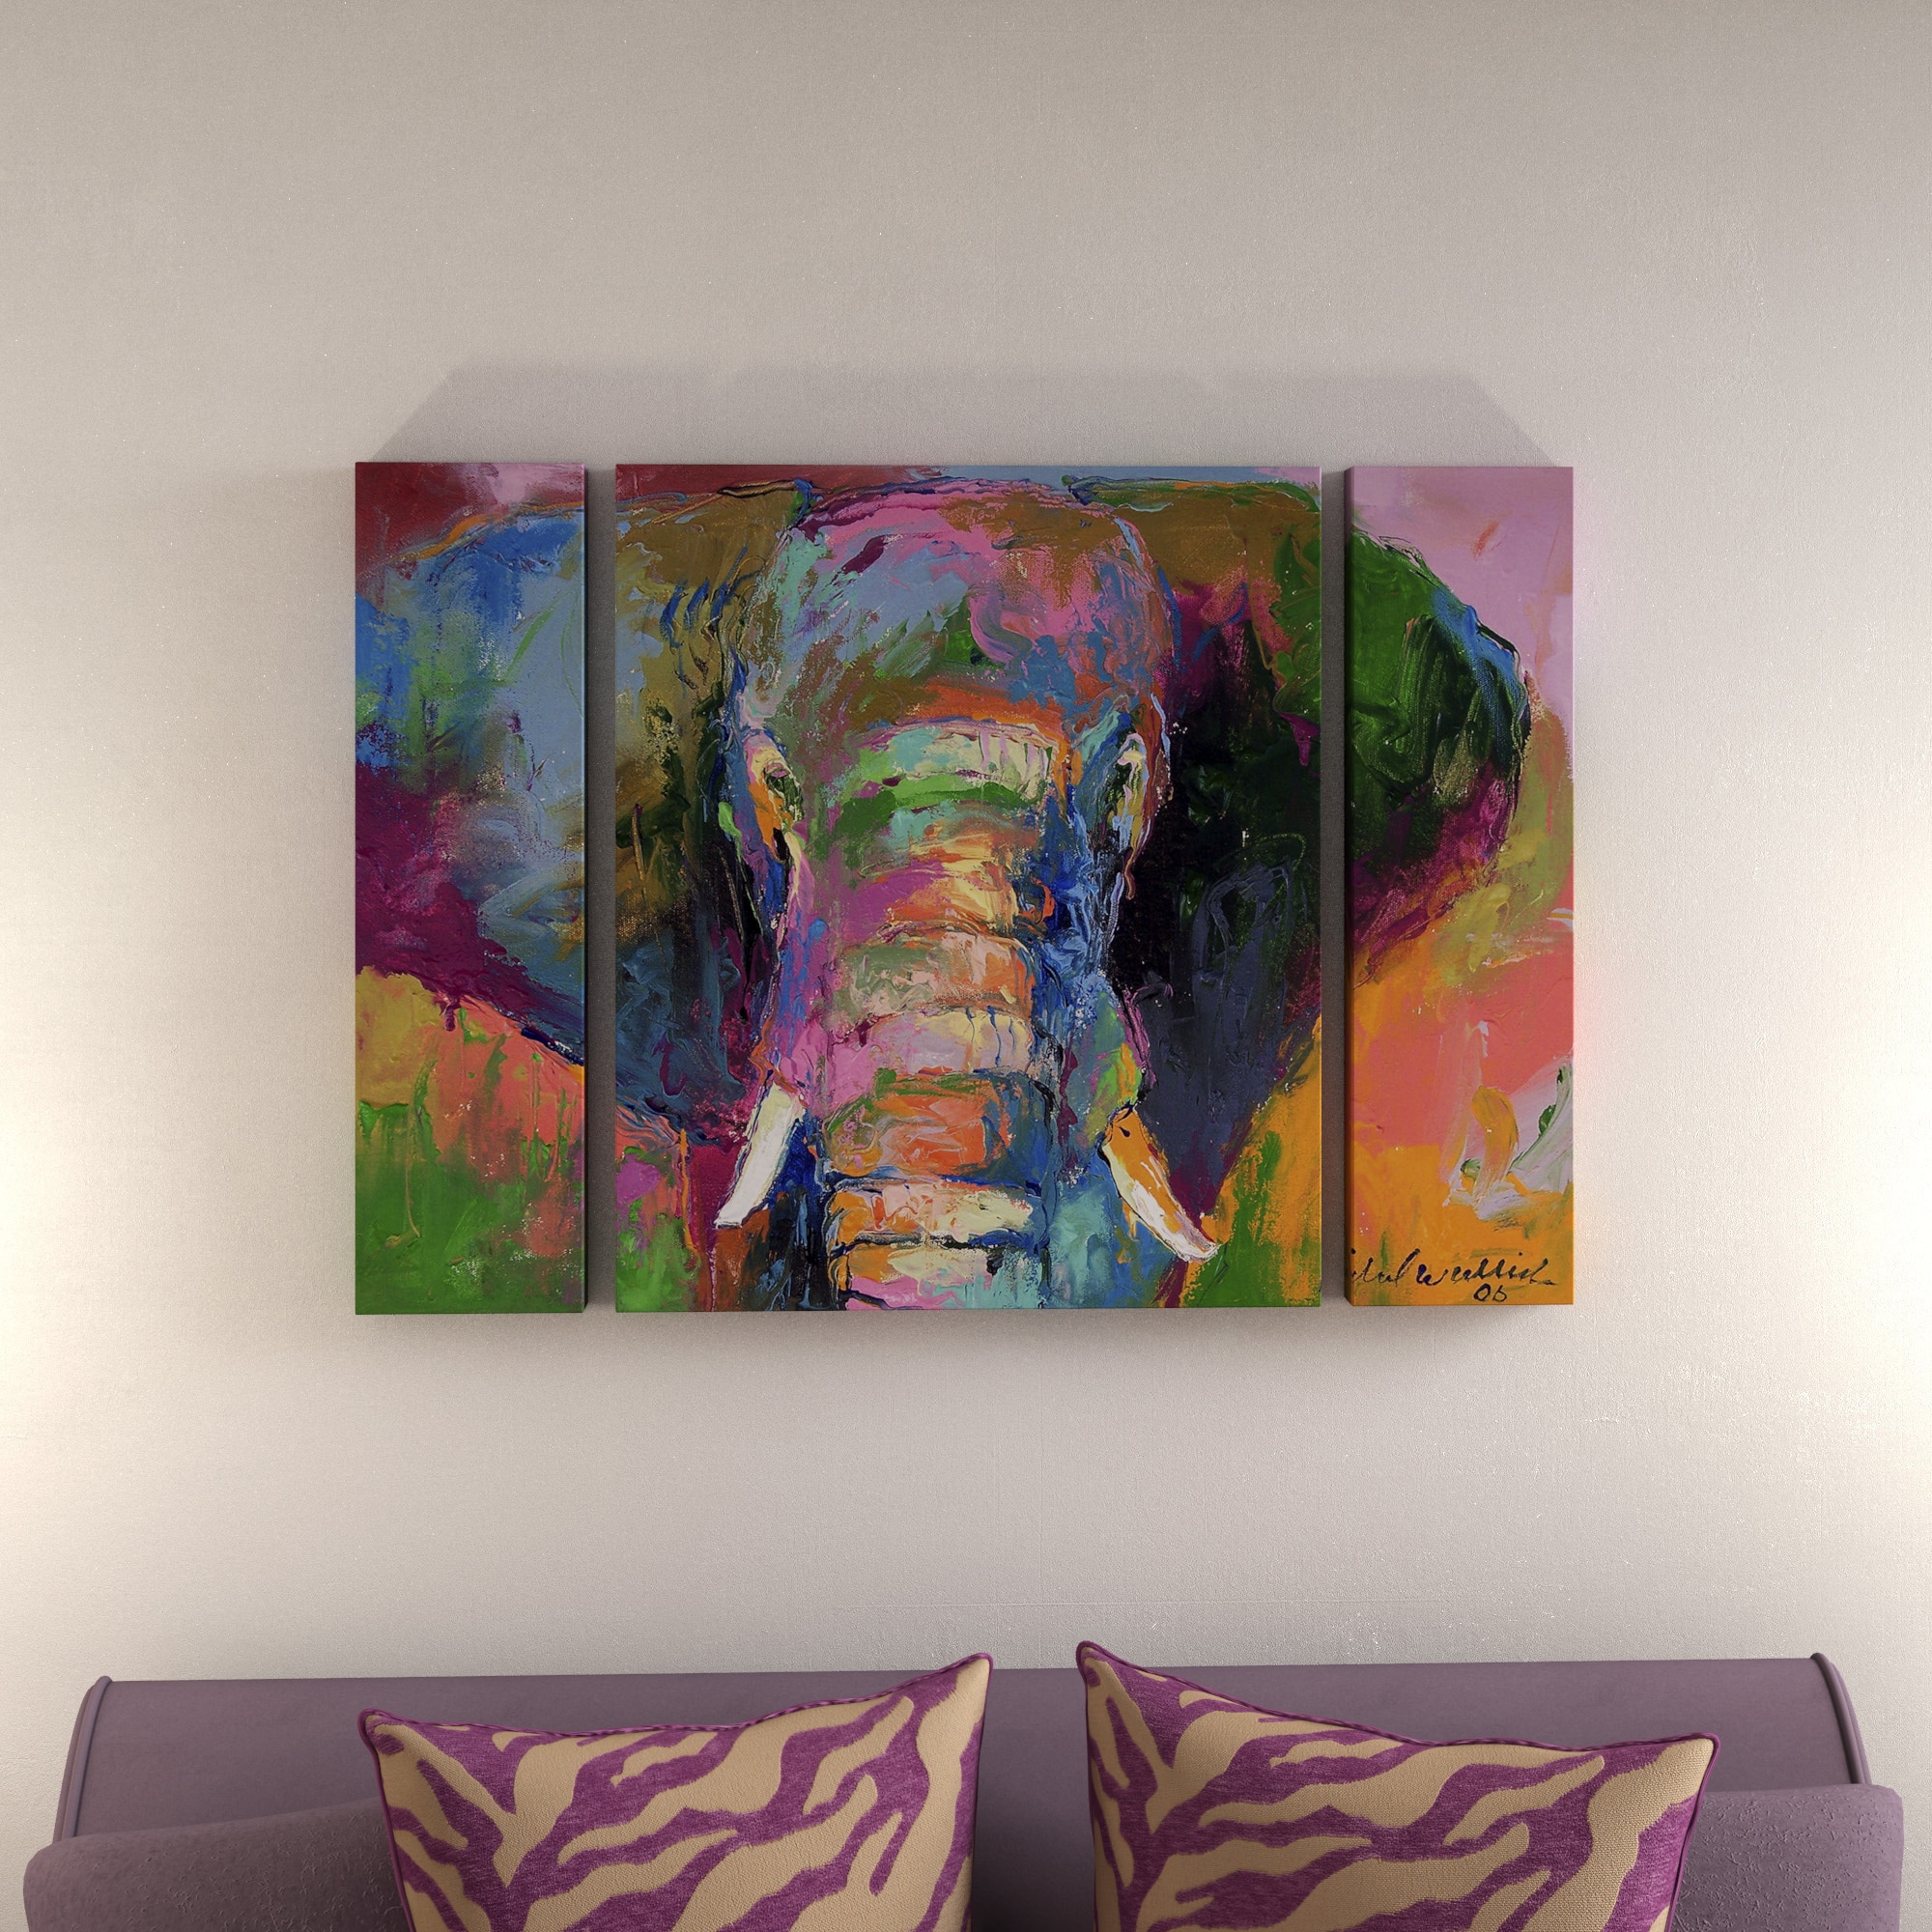 A1 60x75cm Canvas Wall Art of Black and White Elephant for Your Living Room Canvas Prints Pictures